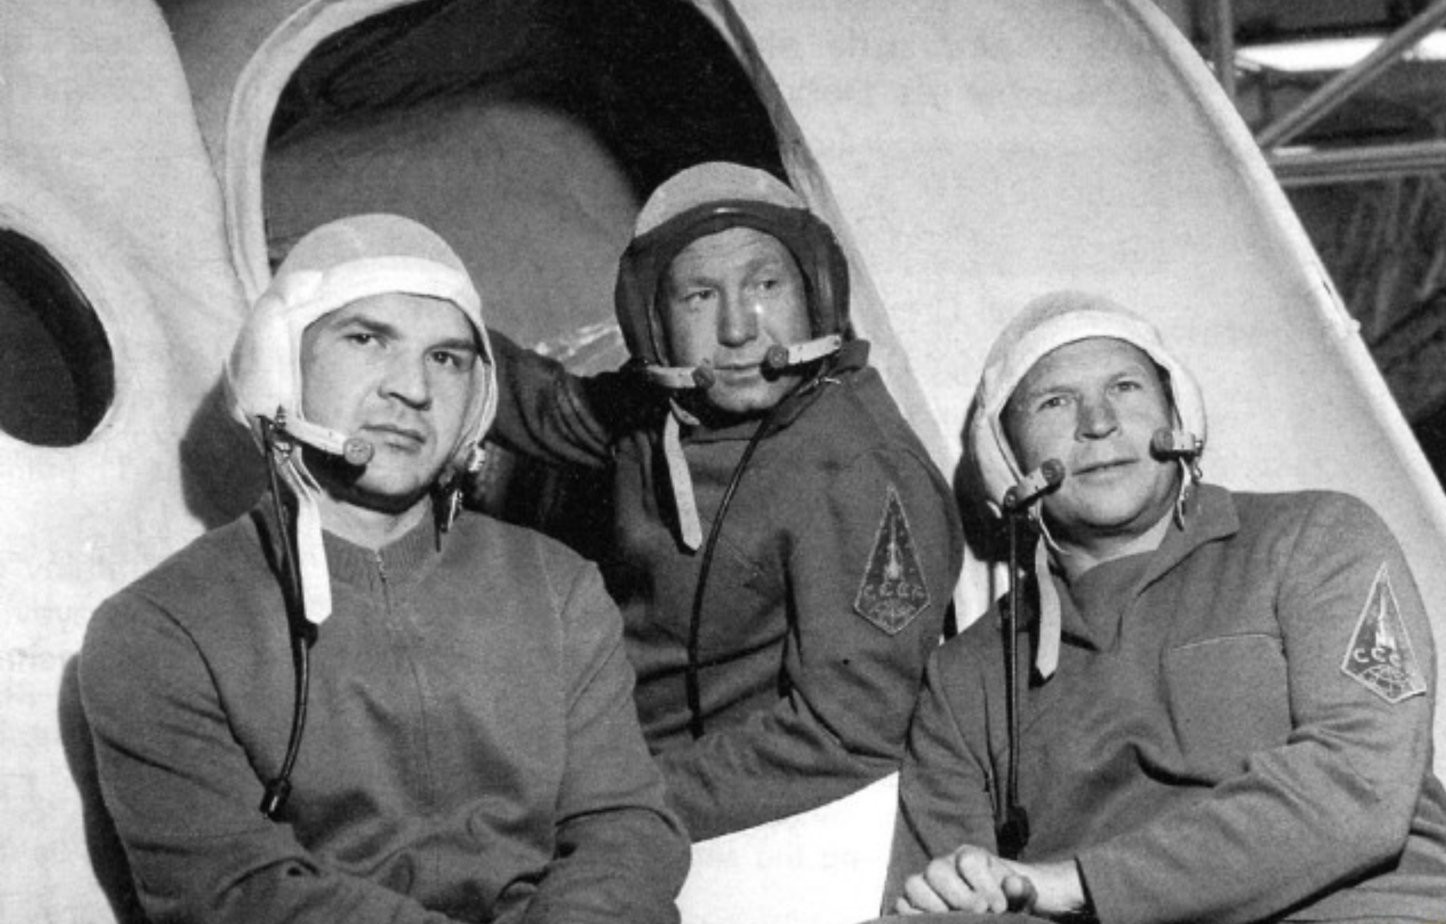 If You Get 12/15 on This Quiz, You Are a 🚀 Space Race Expert Soyuz 11